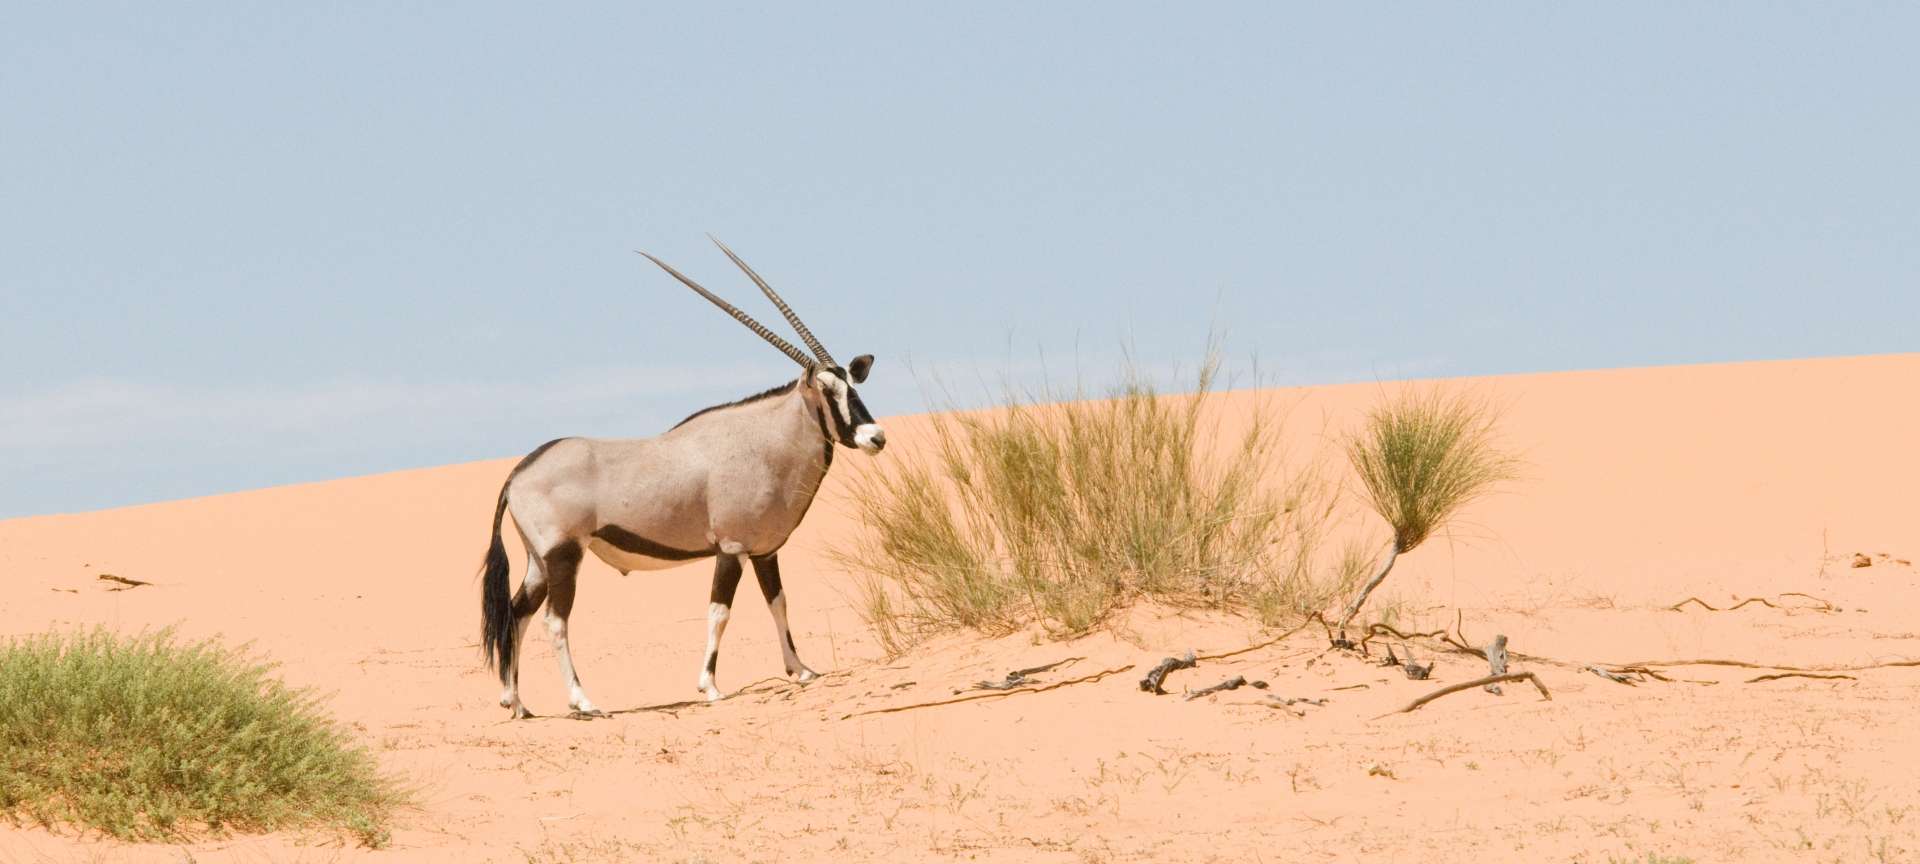 The oryx strikes a formidable pose against the backdrop of the Kalahari Desert